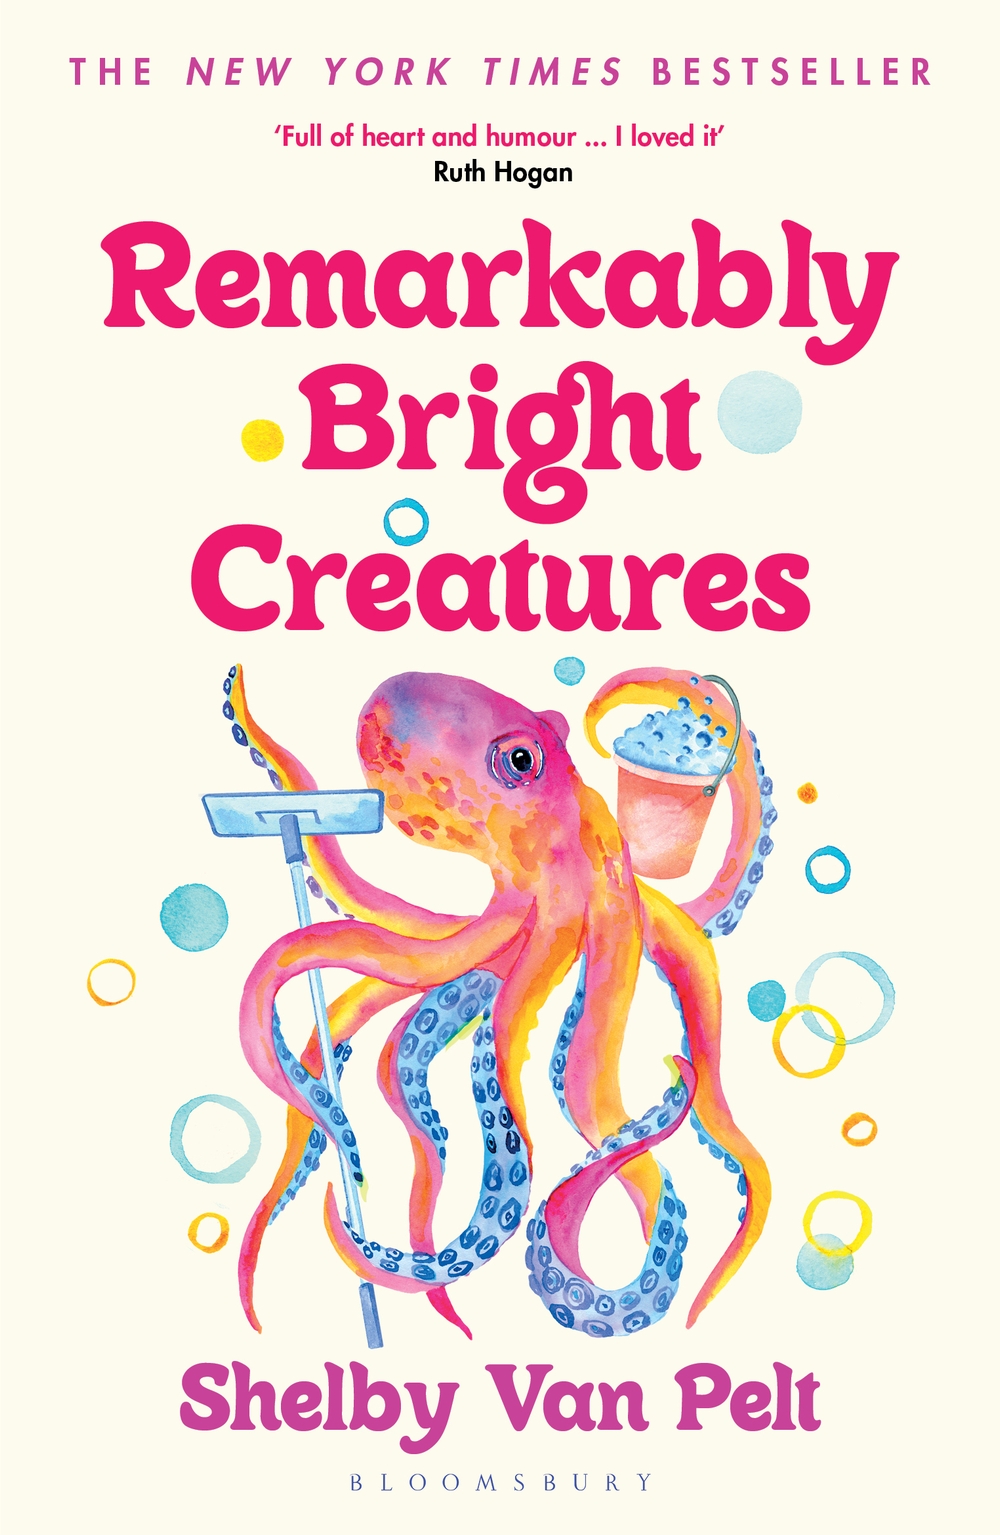 Remarkably Bright Creatures book jacket